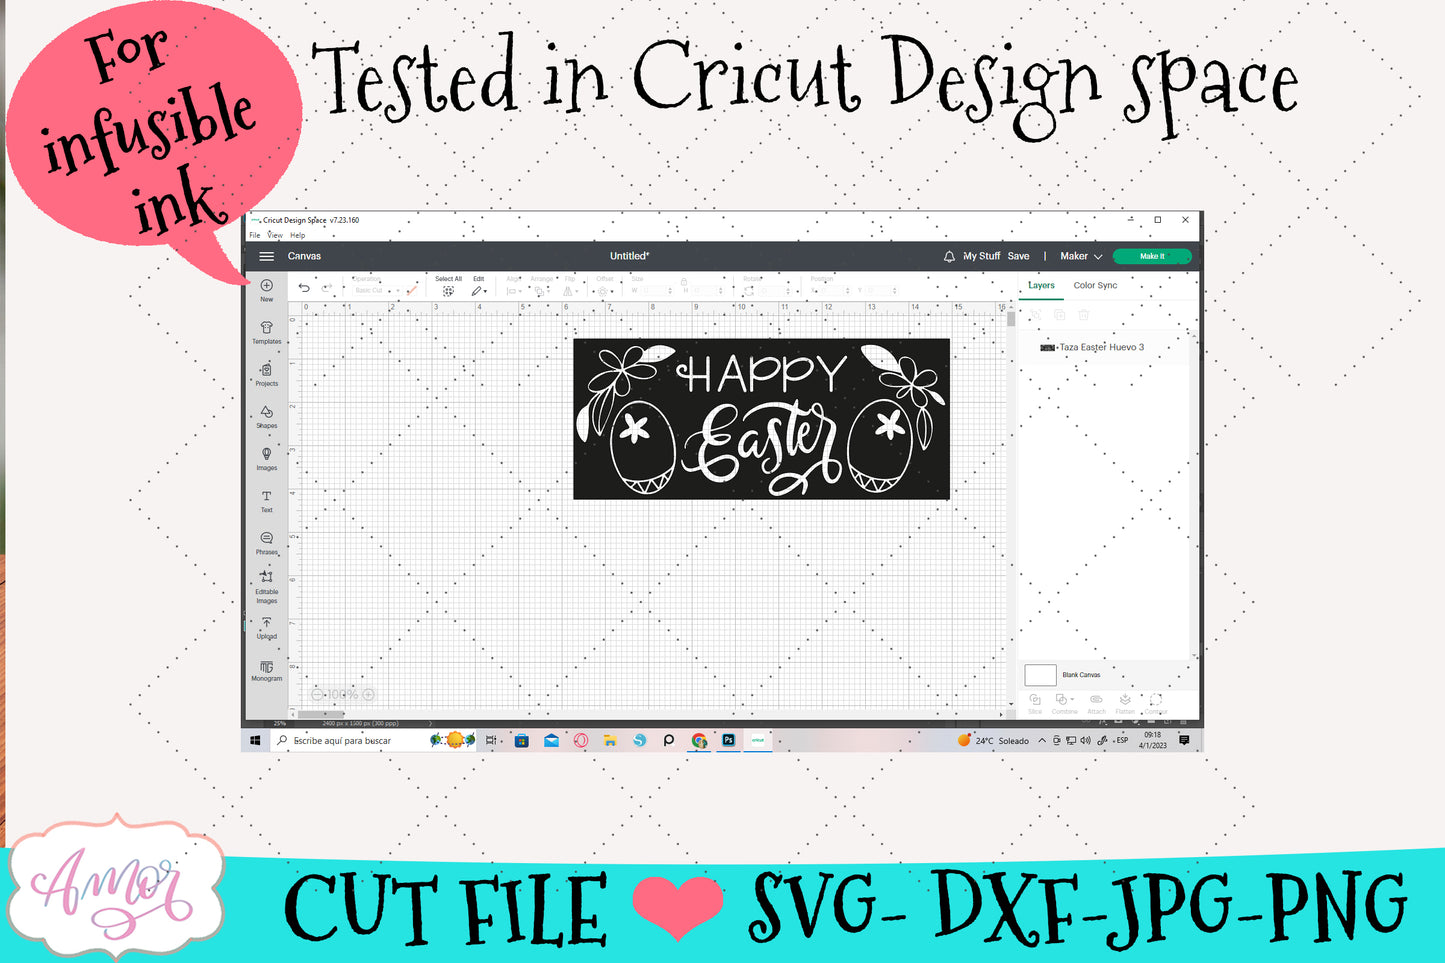 Happy Easter Mug Wrap SVG for Cricut infusible ink